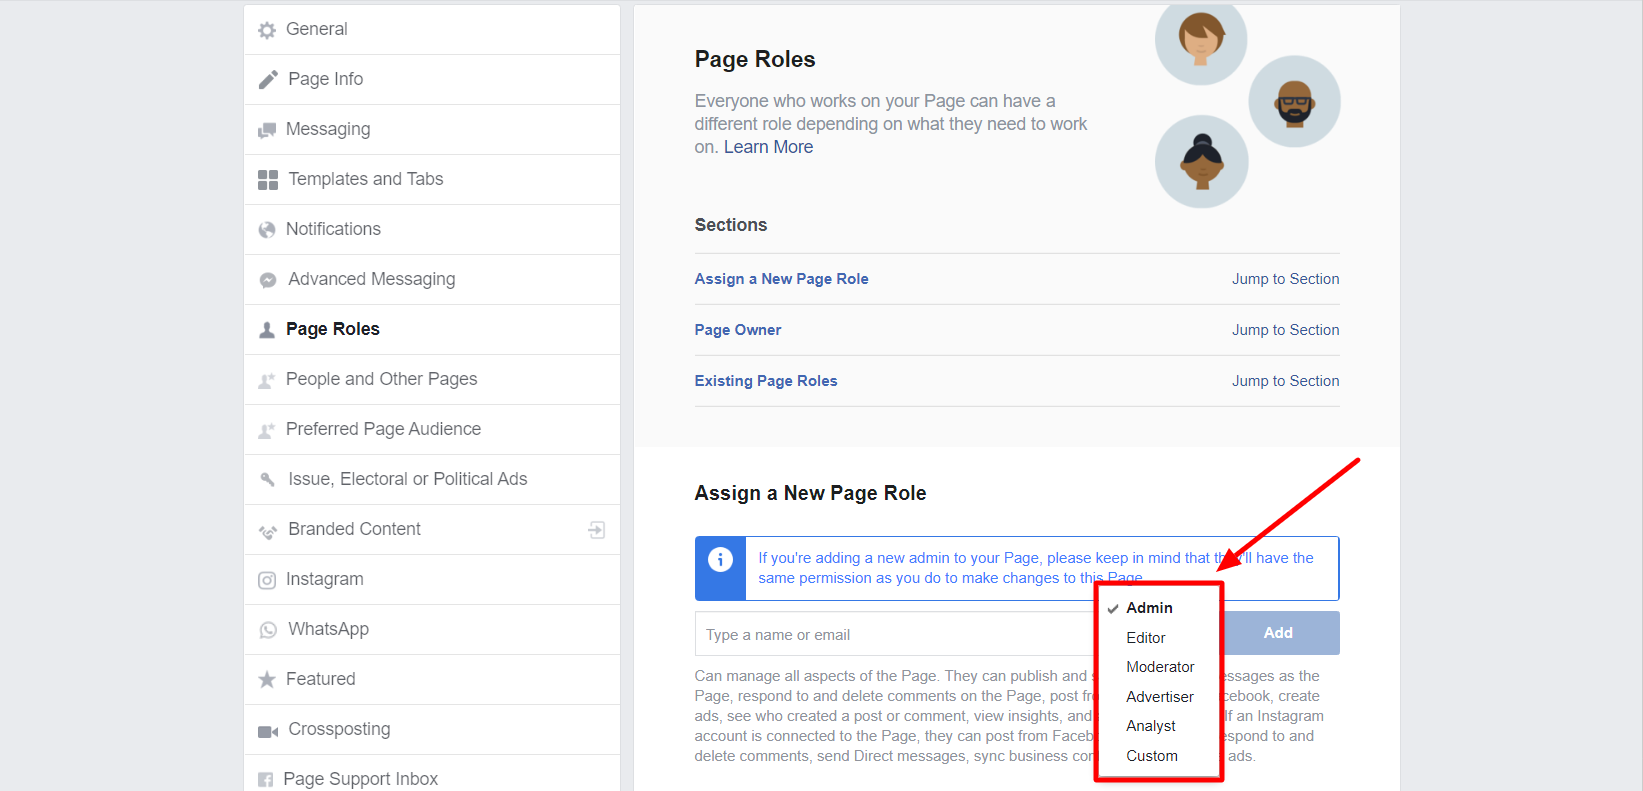 Drop Down List - How To Provide Facebook Page Admin Rights?